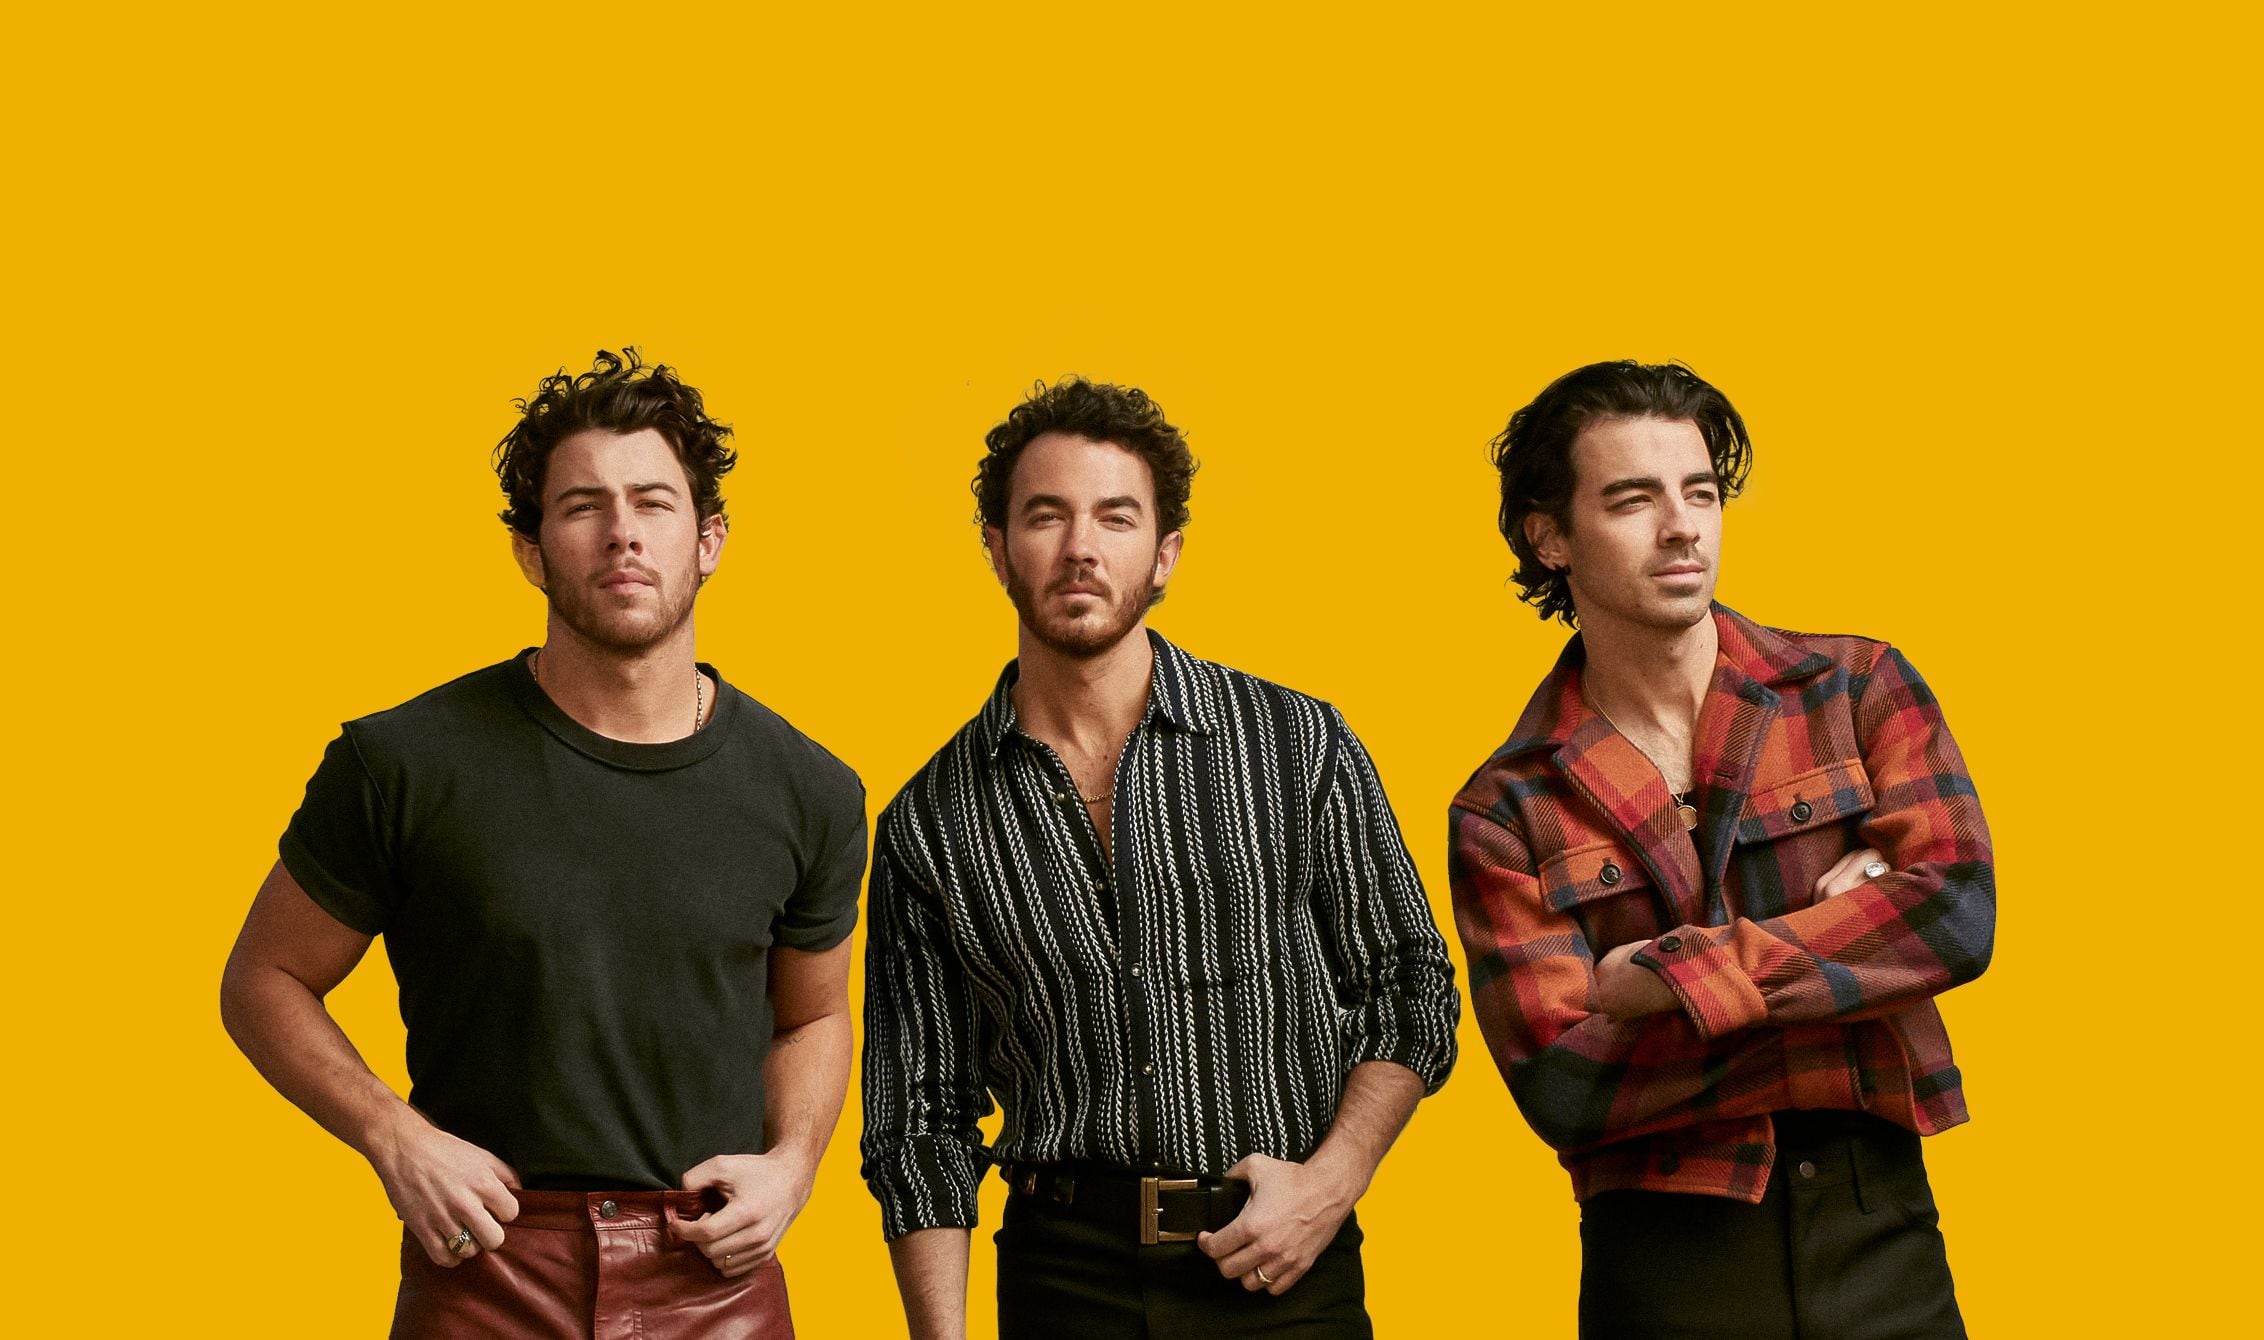 Summer in CT features the Jonas Brothers, Post Malone and more